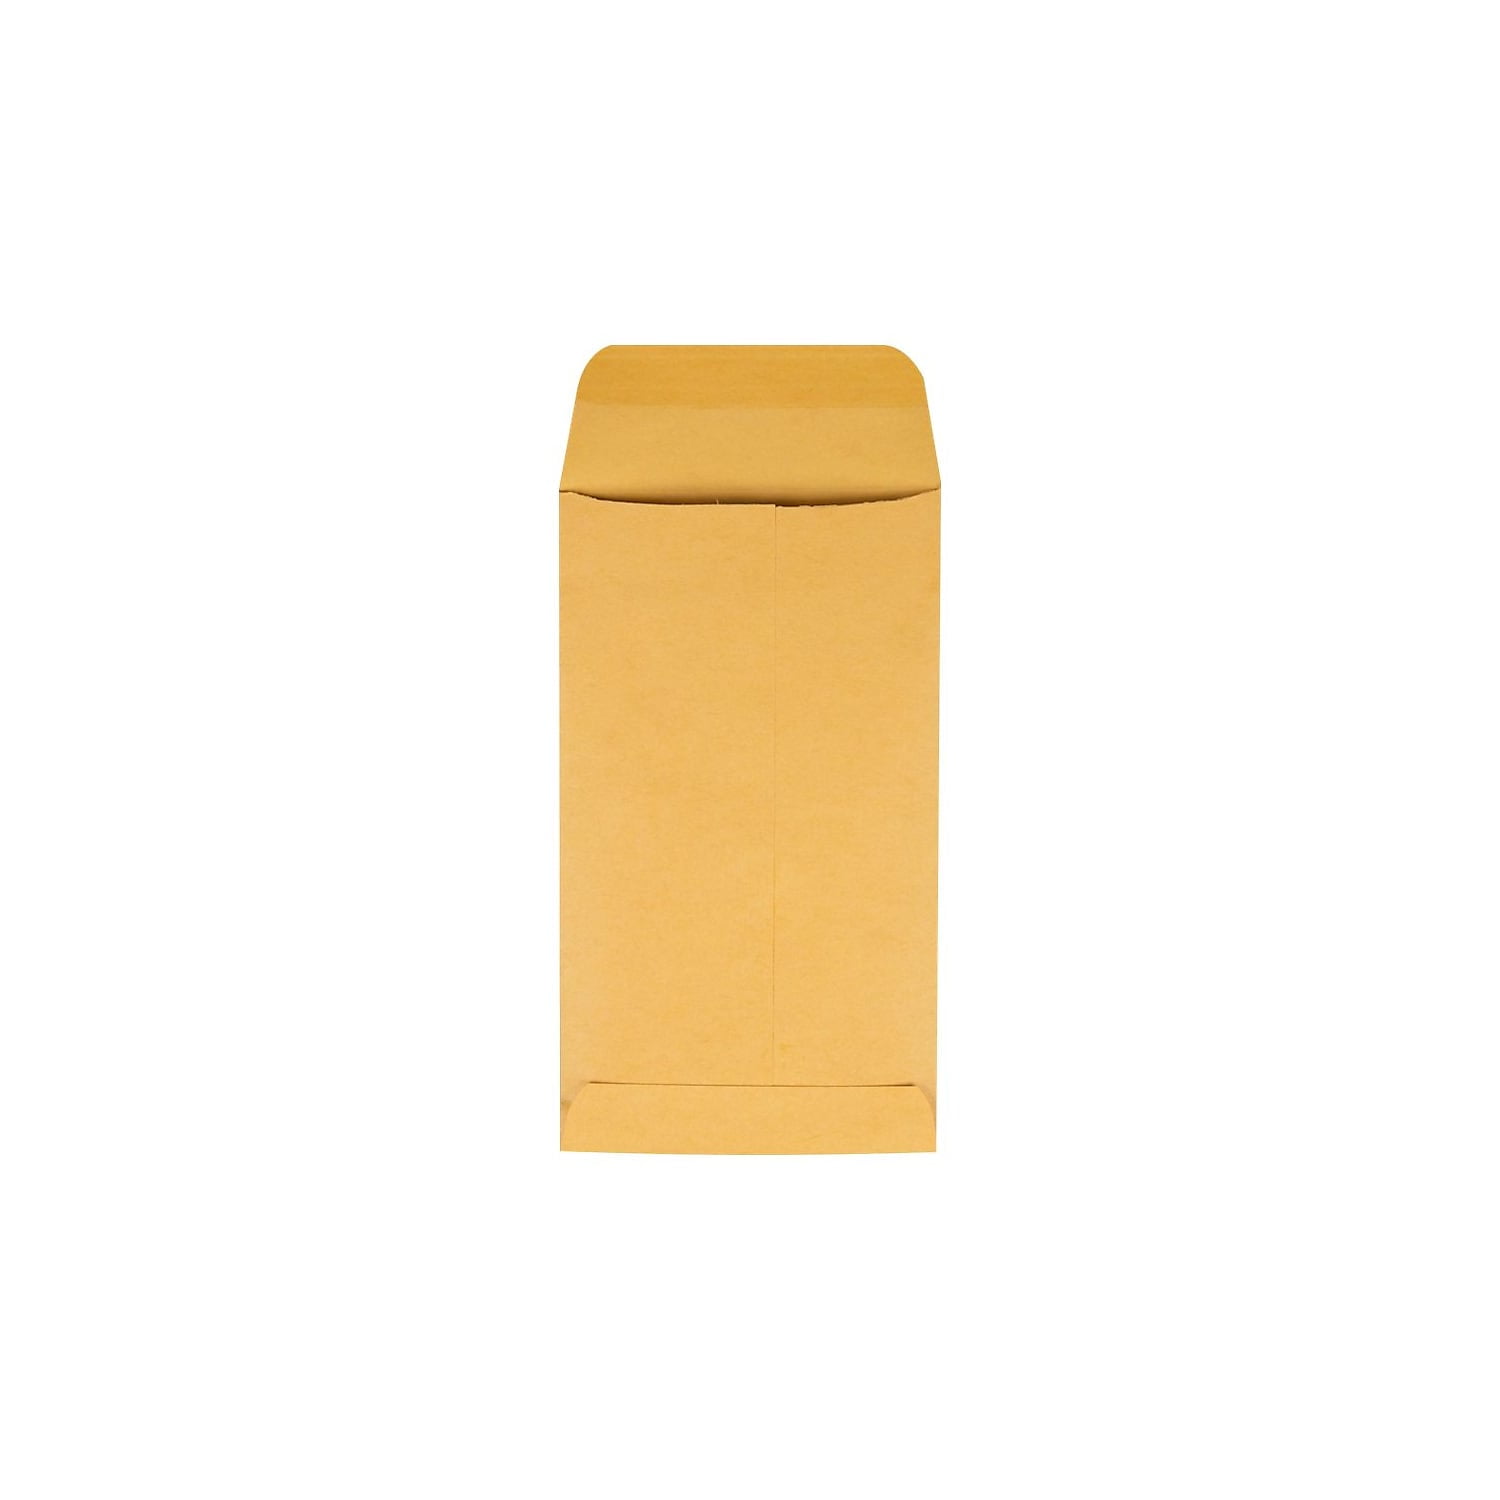 Brown Kraft Quality Park Kraft Coin/Small Parts Envelopes with Split Gum Seal 5 1/2 3 1/8 x 5 1/2 Box of 500 